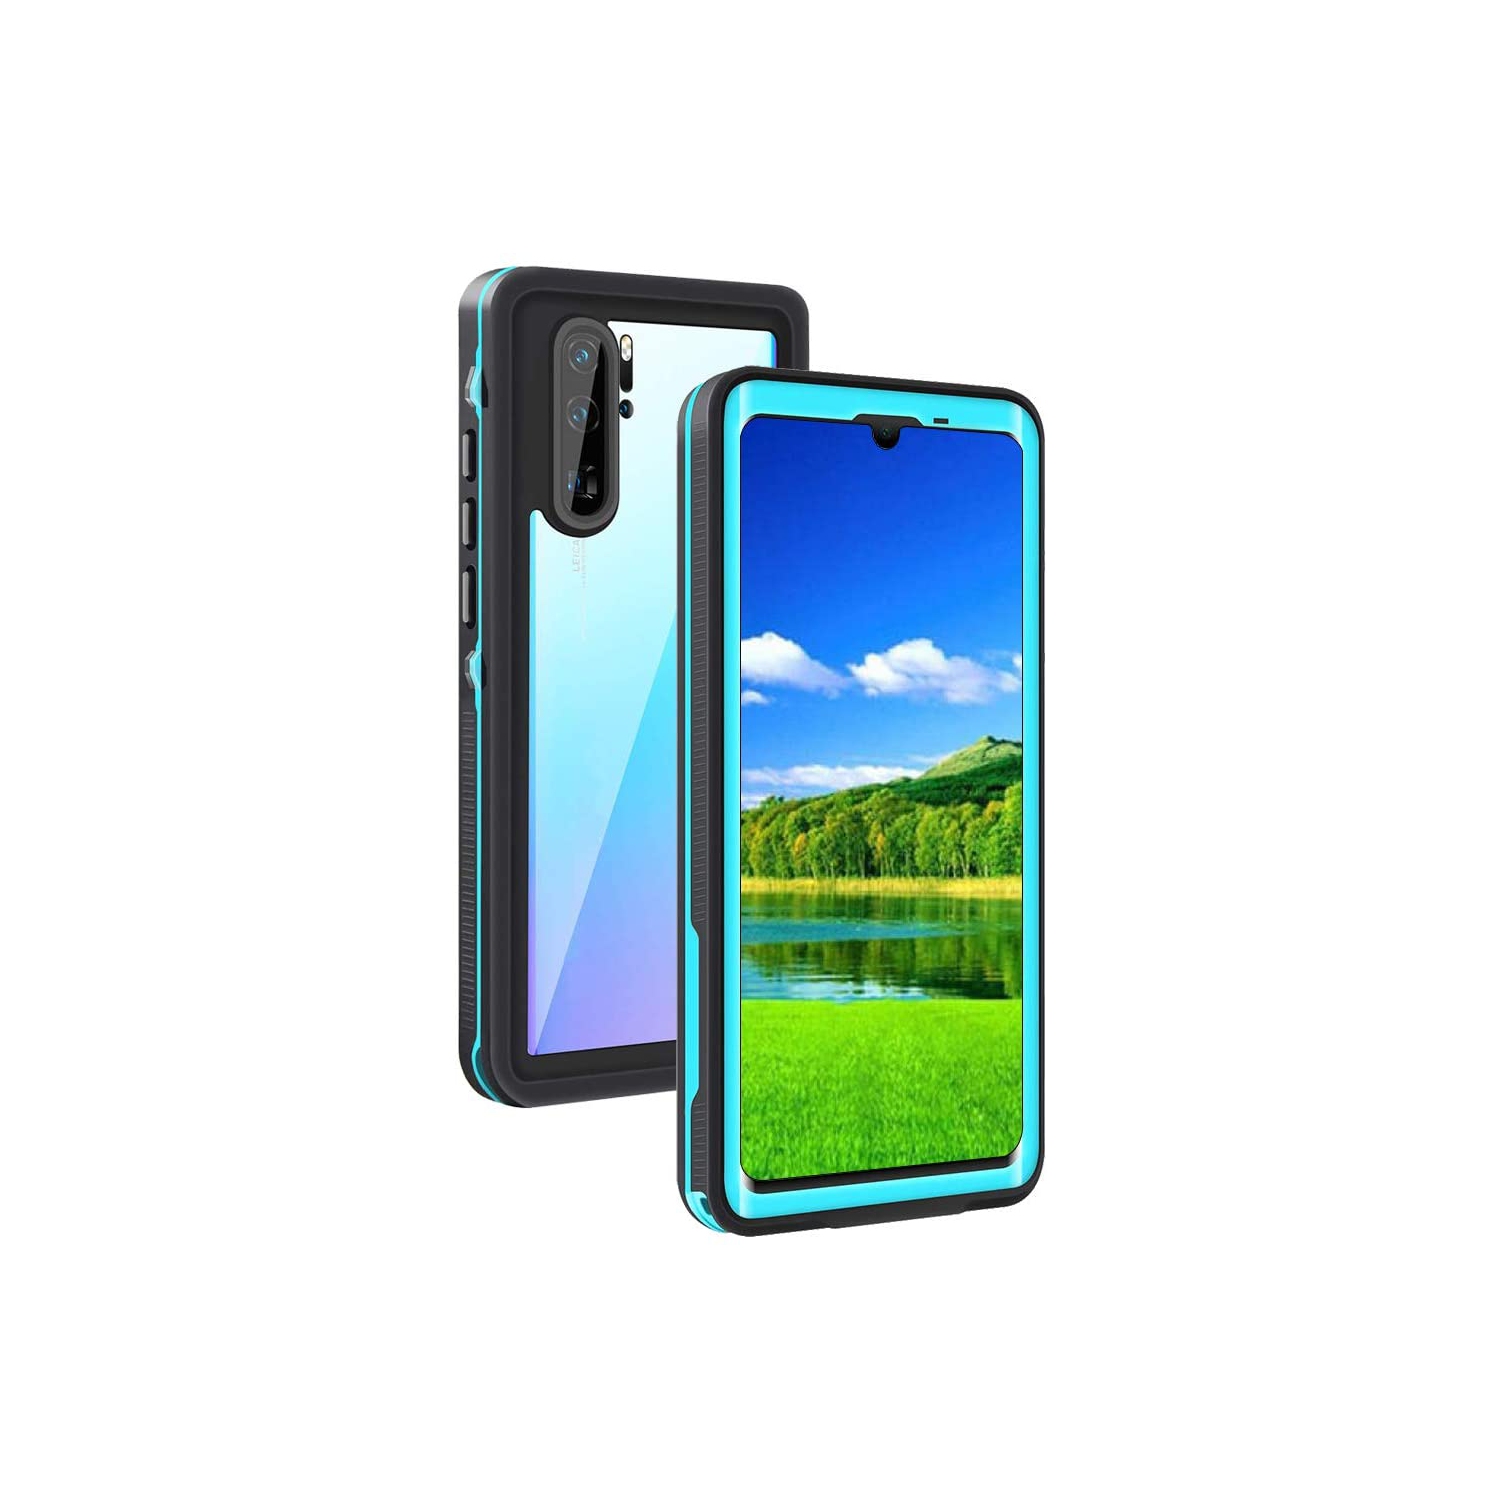 Compatible with P30 Pro Waterproof Case,Yuvitor IP68 Certified Protective Underwater Cover Built in Screen Protector